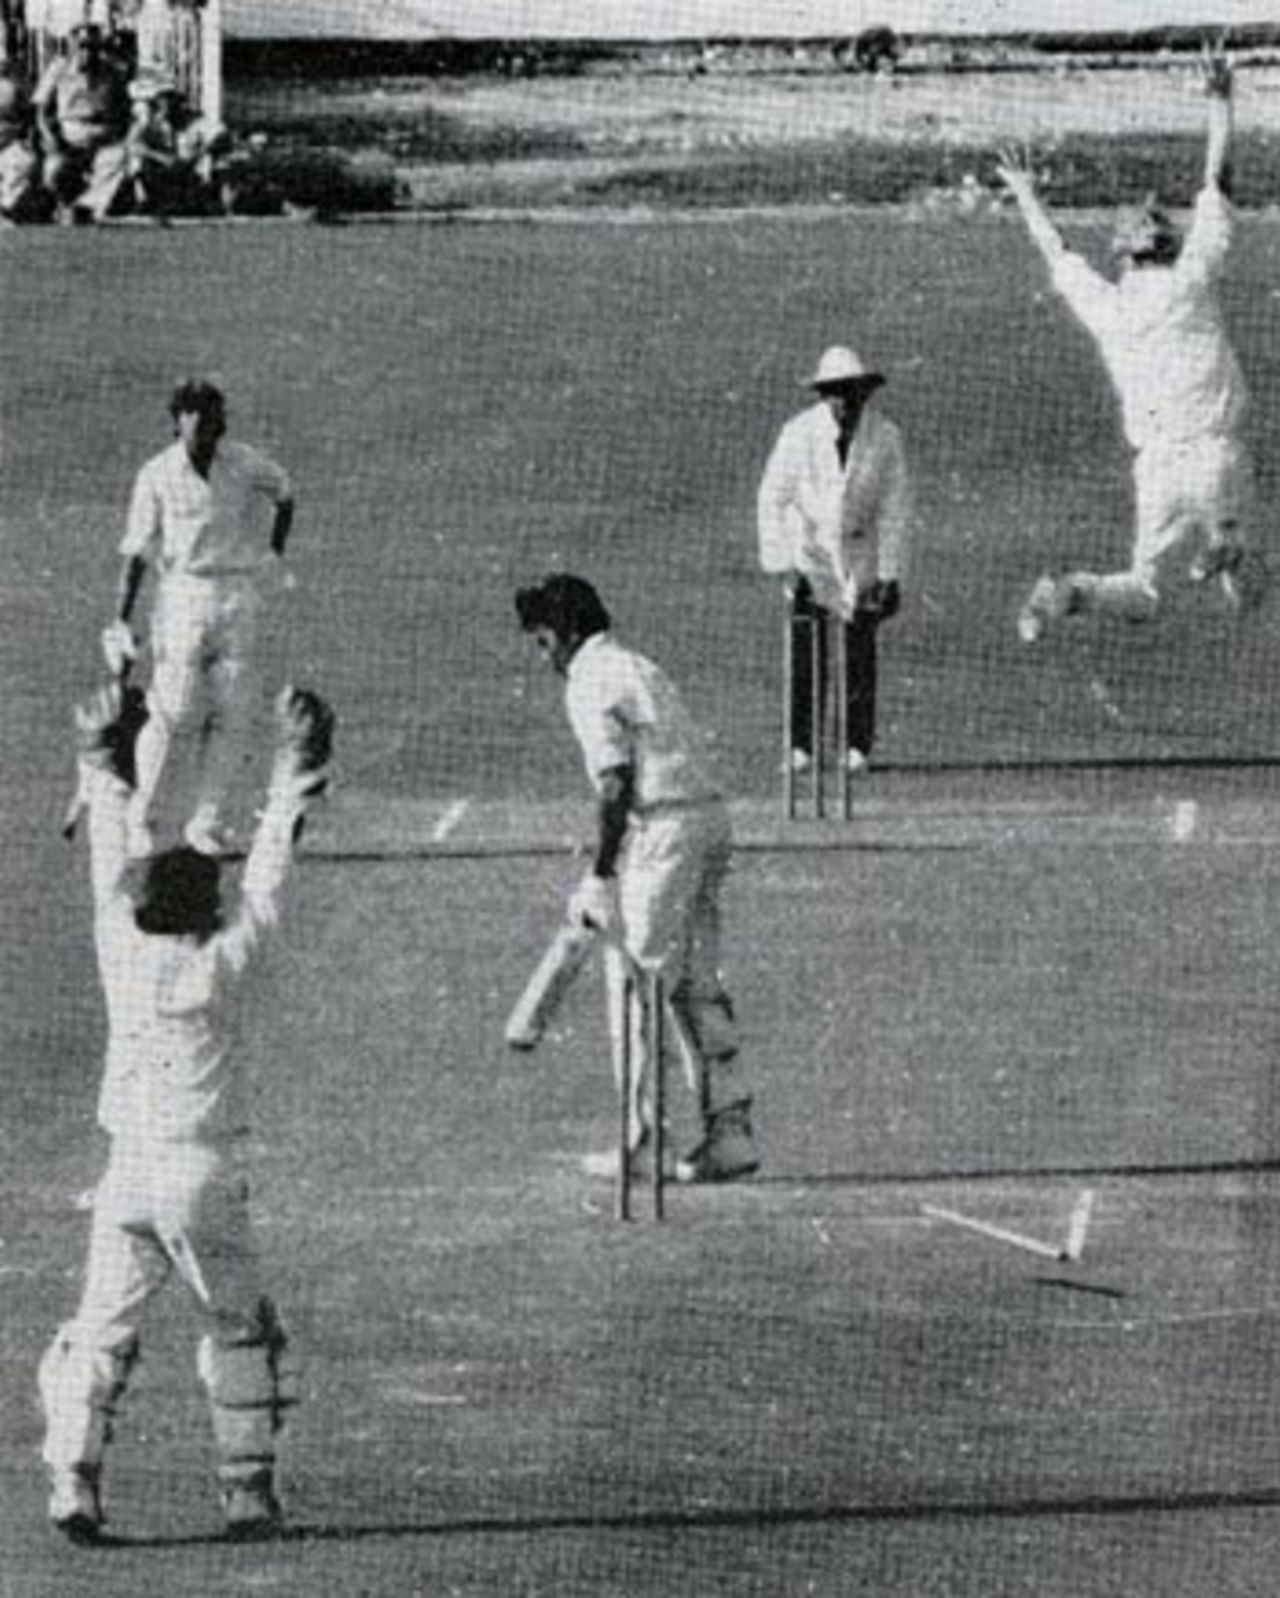 Tony Greig leaps in delight as he bowls Salim Durani for 4, India v England, 2nd Test, December 30, 1972